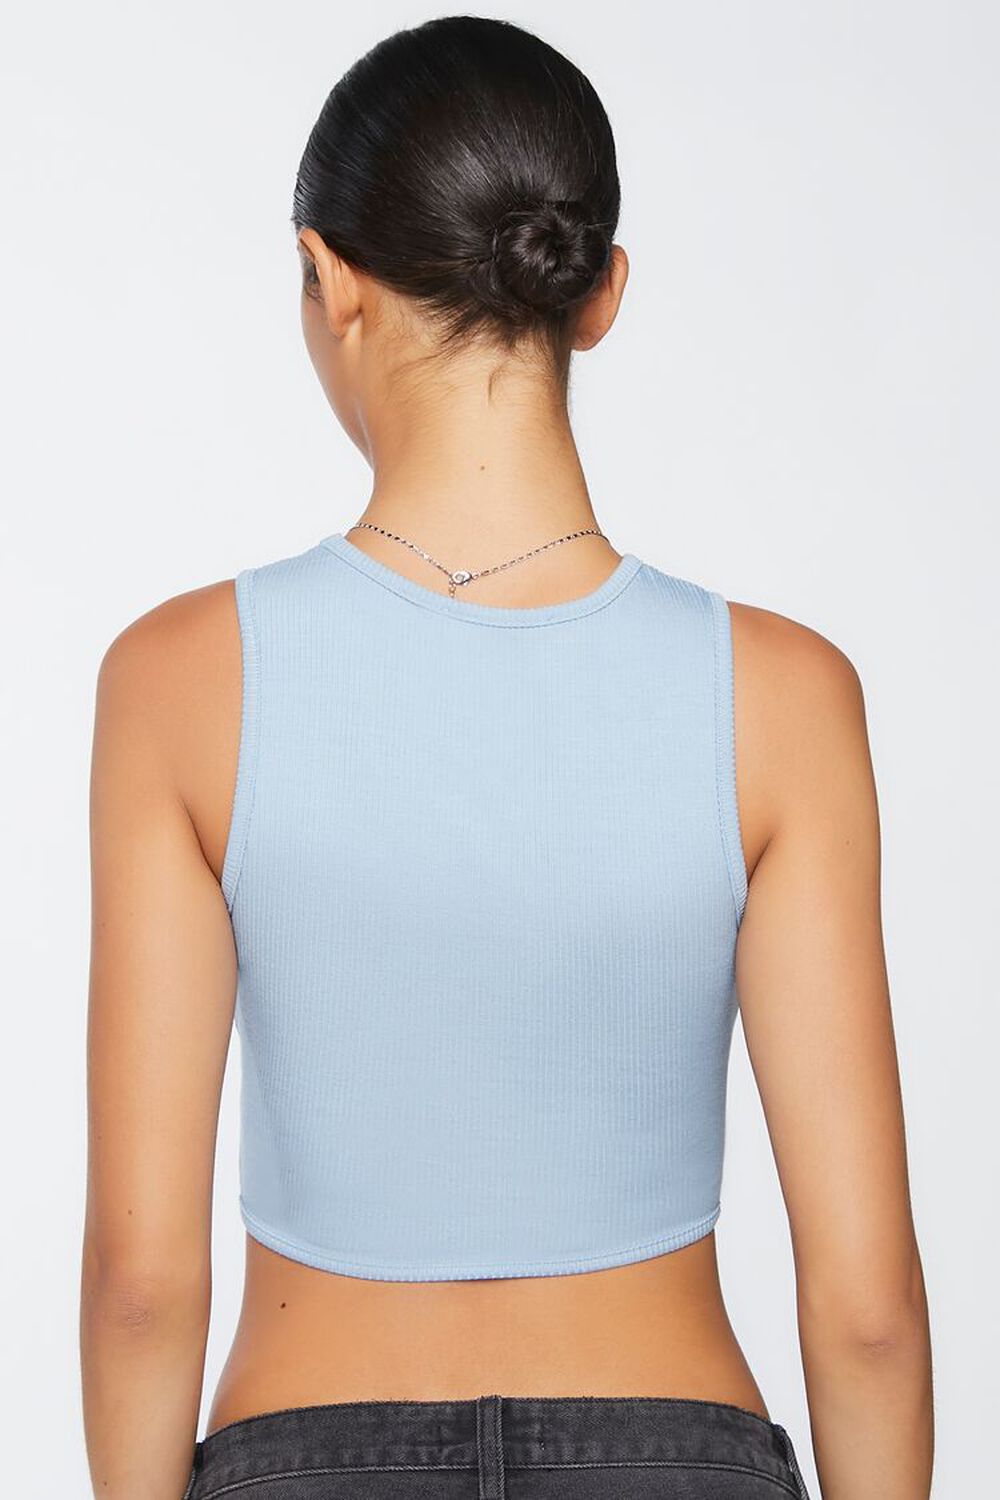 DUSTY BLUE Ribbed Cutout Crop Top, image 3